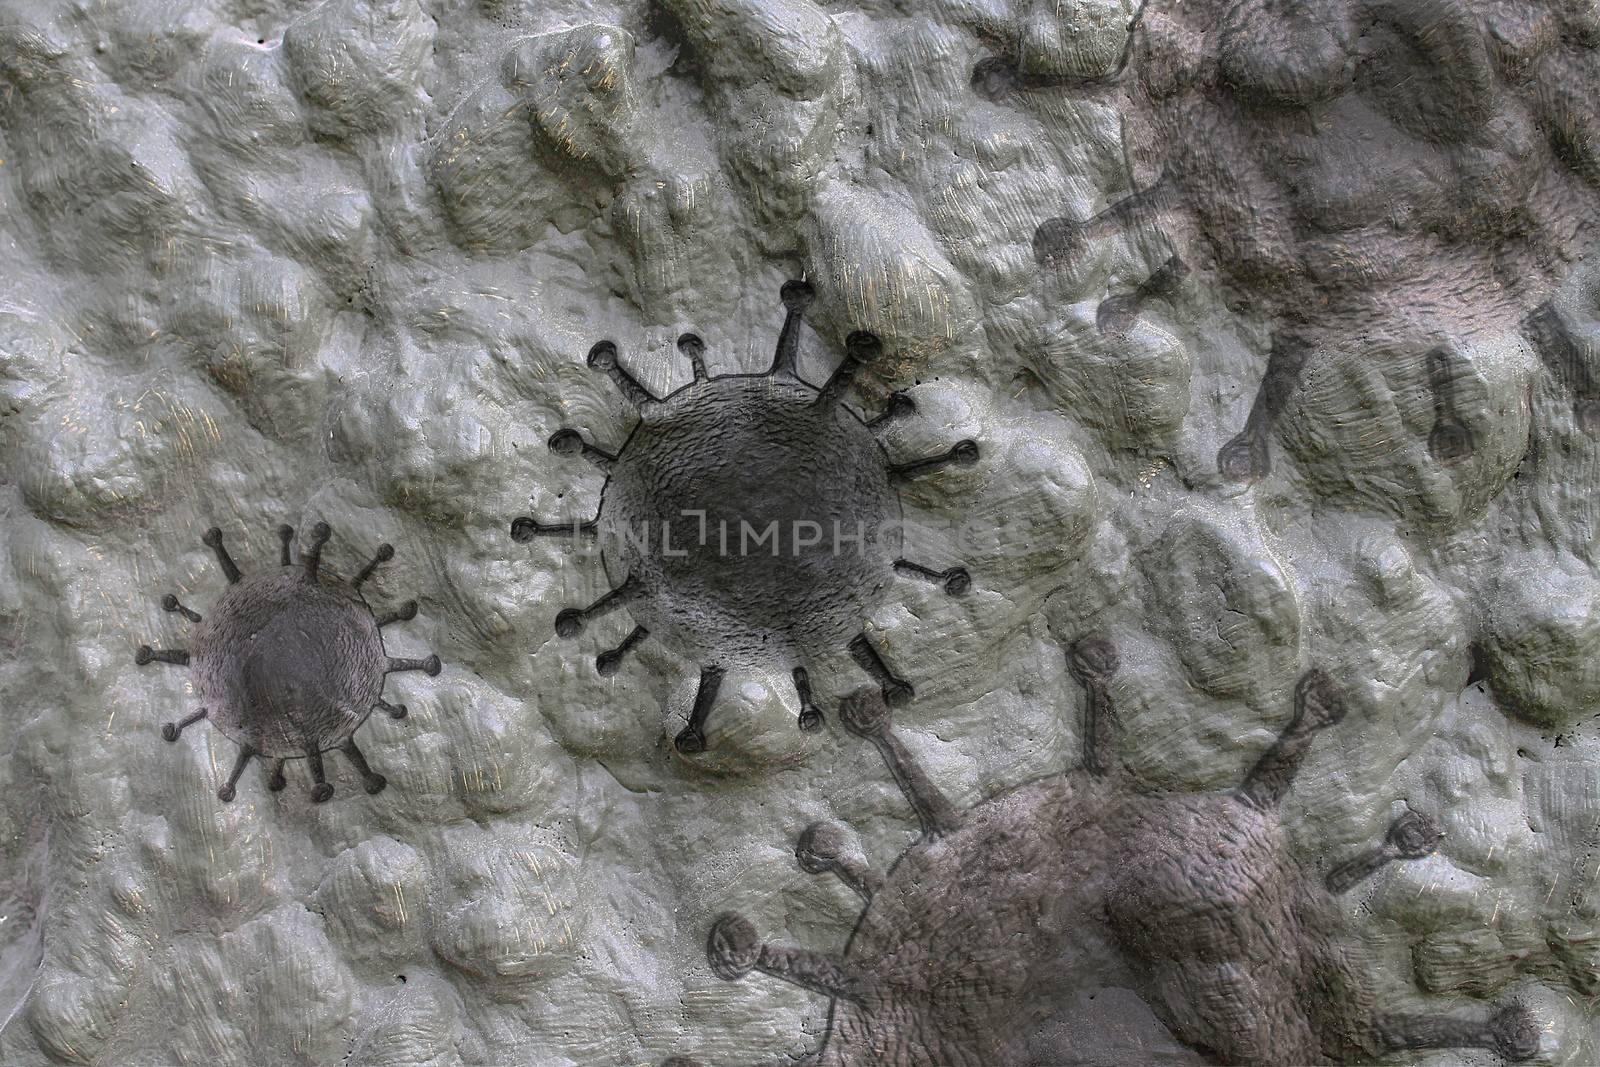 Old stone and rock textures with some virus fossil virus visualization.